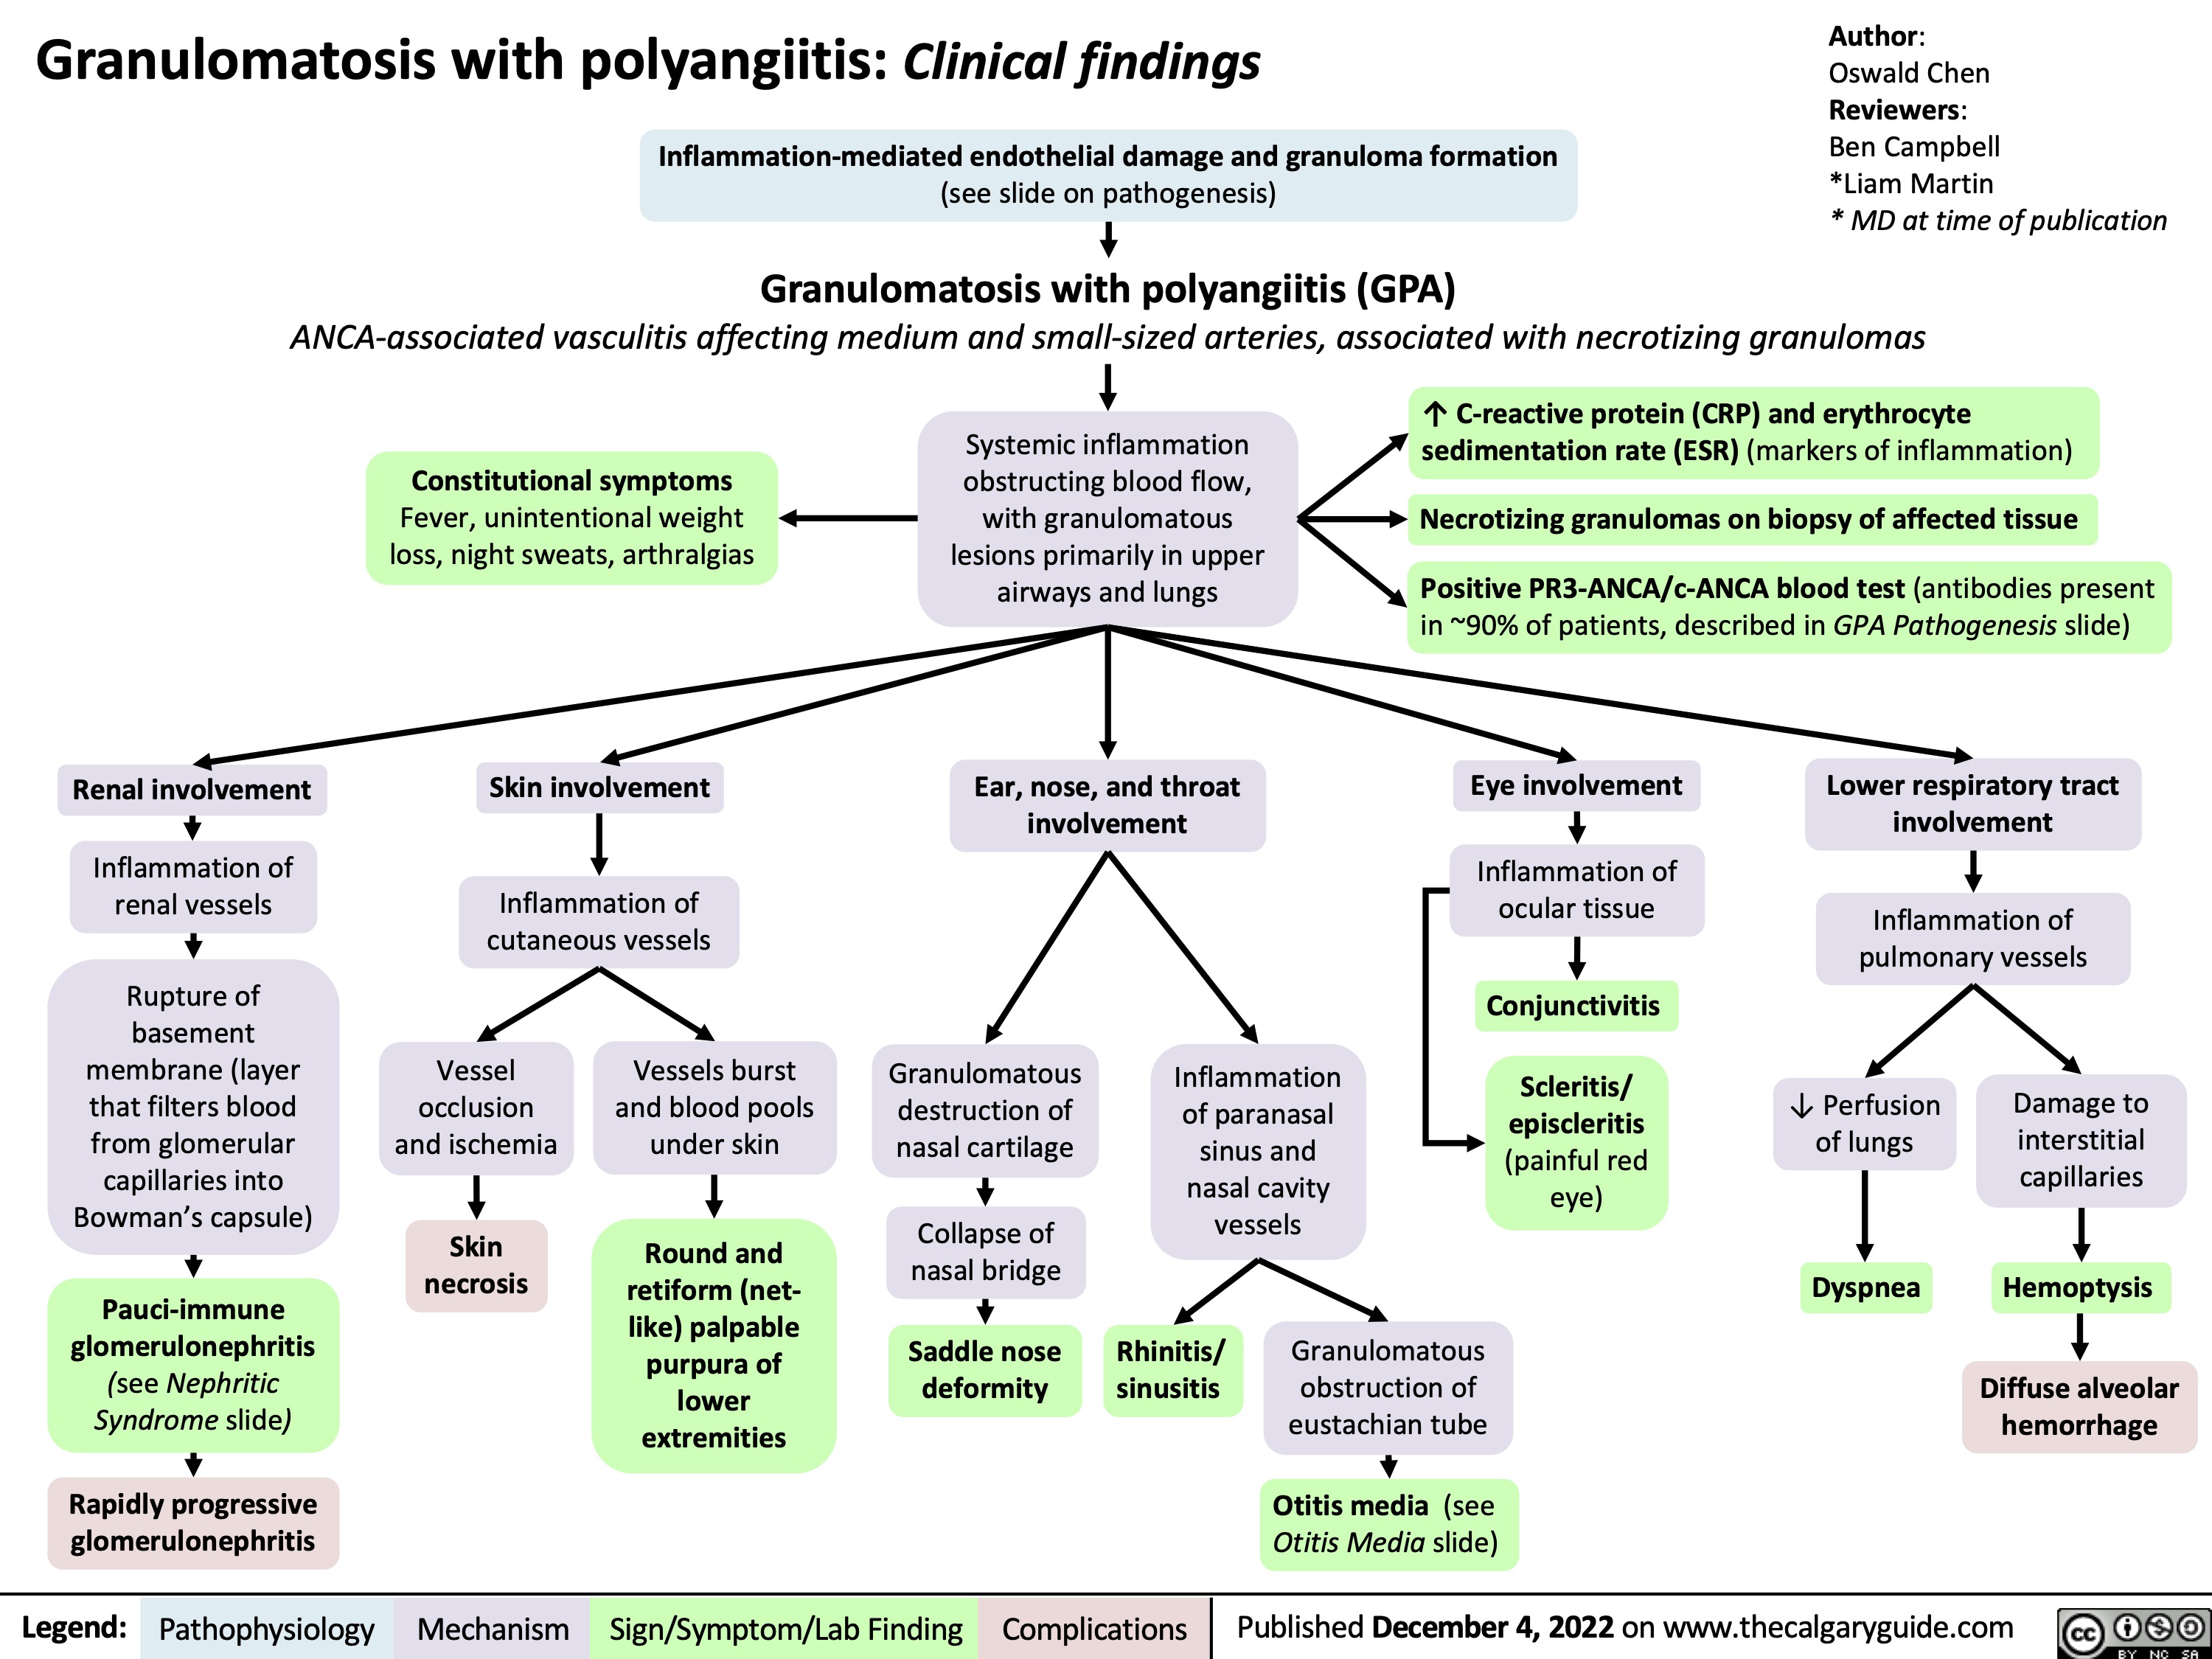 Granulomatosis with polyangiitis: Clinical findings Inflammation-mediated endothelial damage and granuloma formation
(see slide on pathogenesis)
Granulomatosis with polyangiitis (GPA)
Author:
Oswald Chen
Reviewers:
Ben Campbell
*Liam Martin
* MD at time of publication
 ANCA-associated vasculitis affecting medium and small-sized arteries, associated with necrotizing granulomas
    Constitutional symptoms
Fever, unintentional weight loss, night sweats, arthralgias
Skin involvement
Inflammation of cutaneous vessels
Systemic inflammation obstructing blood flow, with granulomatous lesions primarily in upper airways and lungs
Ear, nose, and throat involvement
↑ C-reactive protein (CRP) and erythrocyte sedimentation rate (ESR) (markers of inflammation)
Necrotizing granulomas on biopsy of affected tissue
Positive PR3-ANCA/c-ANCA blood test (antibodies present in ~90% of patients, described in GPA Pathogenesis slide)
             Renal involvement
Inflammation of renal vessels
Rupture of basement membrane (layer that filters blood from glomerular capillaries into Bowman’s capsule)
Pauci-immune glomerulonephritis (see Nephritic Syndrome slide)
Rapidly progressive glomerulonephritis
Eye involvement
Inflammation of ocular tissue
Conjunctivitis
Scleritis/ episcleritis (painful red eye)
Lower respiratory tract involvement
Inflammation of pulmonary vessels
                 Vessel occlusion and ischemia
Skin necrosis
Vessels burst and blood pools under skin
Round and retiform (net- like) palpable purpura of lower extremities
Granulomatous destruction of nasal cartilage
Collapse of nasal bridge
Saddle nose deformity
Inflammation of paranasal sinus and nasal cavity vessels
↓ Perfusion of lungs
Dyspnea
Damage to interstitial capillaries
Hemoptysis
Diffuse alveolar hemorrhage
              Rhinitis/ sinusitis
Granulomatous obstruction of eustachian tube
Otitis media (see Otitis Media slide)
   
Legend:
Pathophysiology
Mechanism
Sign/Symptom/Lab Finding
Complications
Published December 4, 2022 on www.thecalgaryguide.com
 